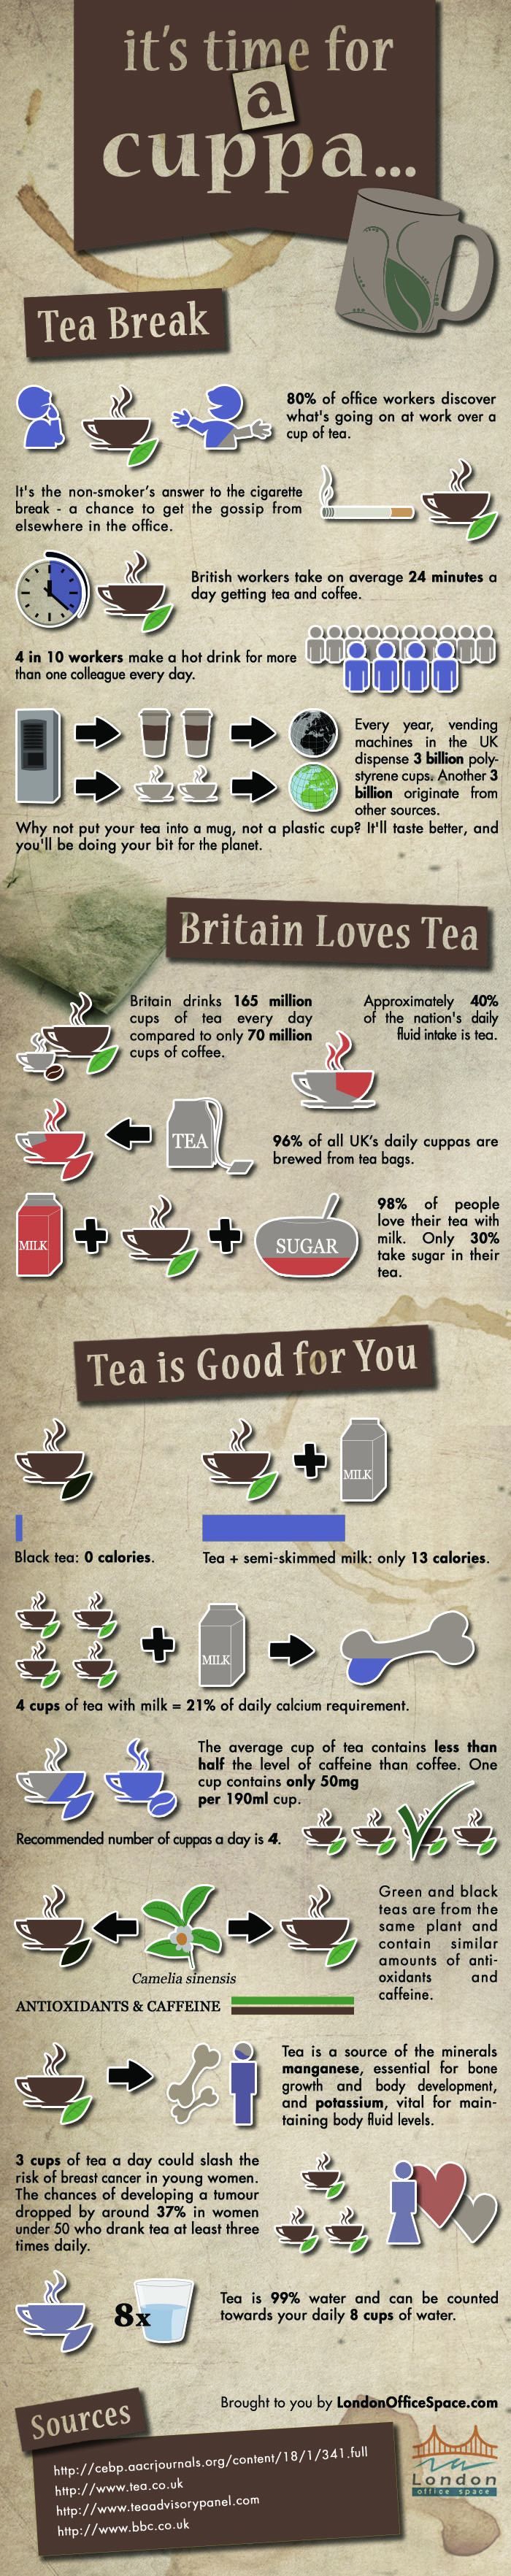 How Much Tea do the British Really Drink